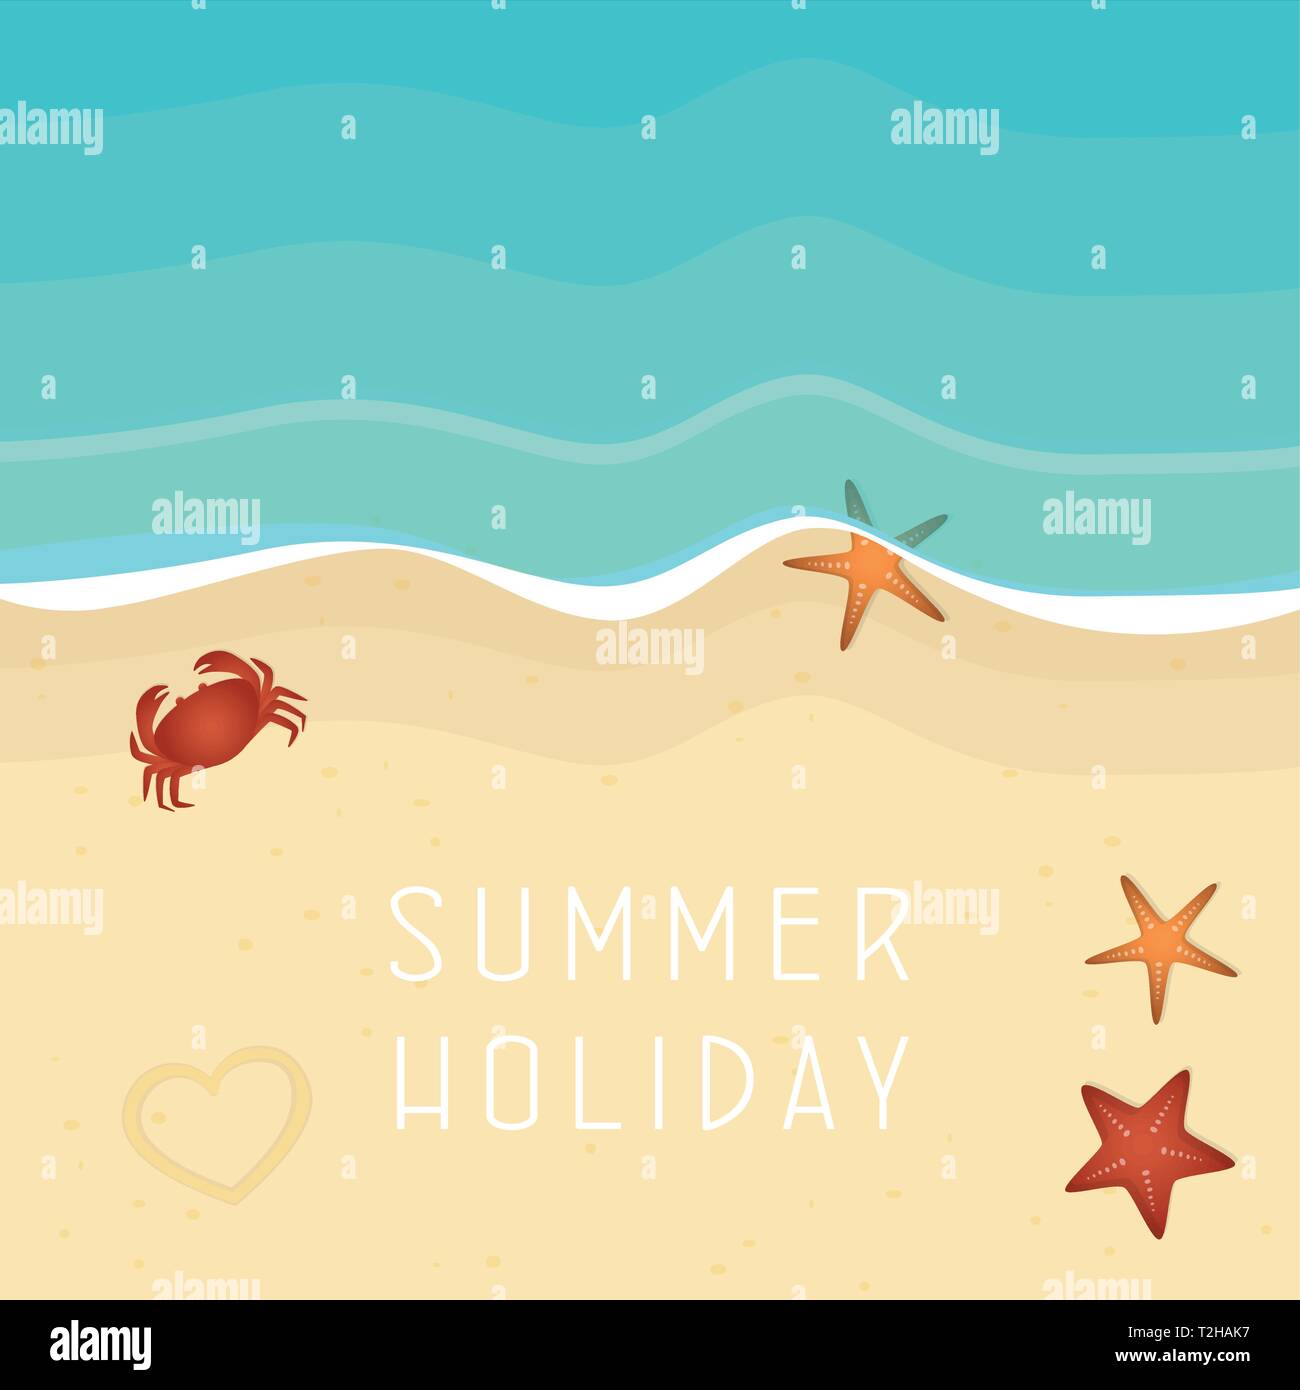 summer holiday on the beach with starfish and crab vector illustration EPS10 Stock Vector